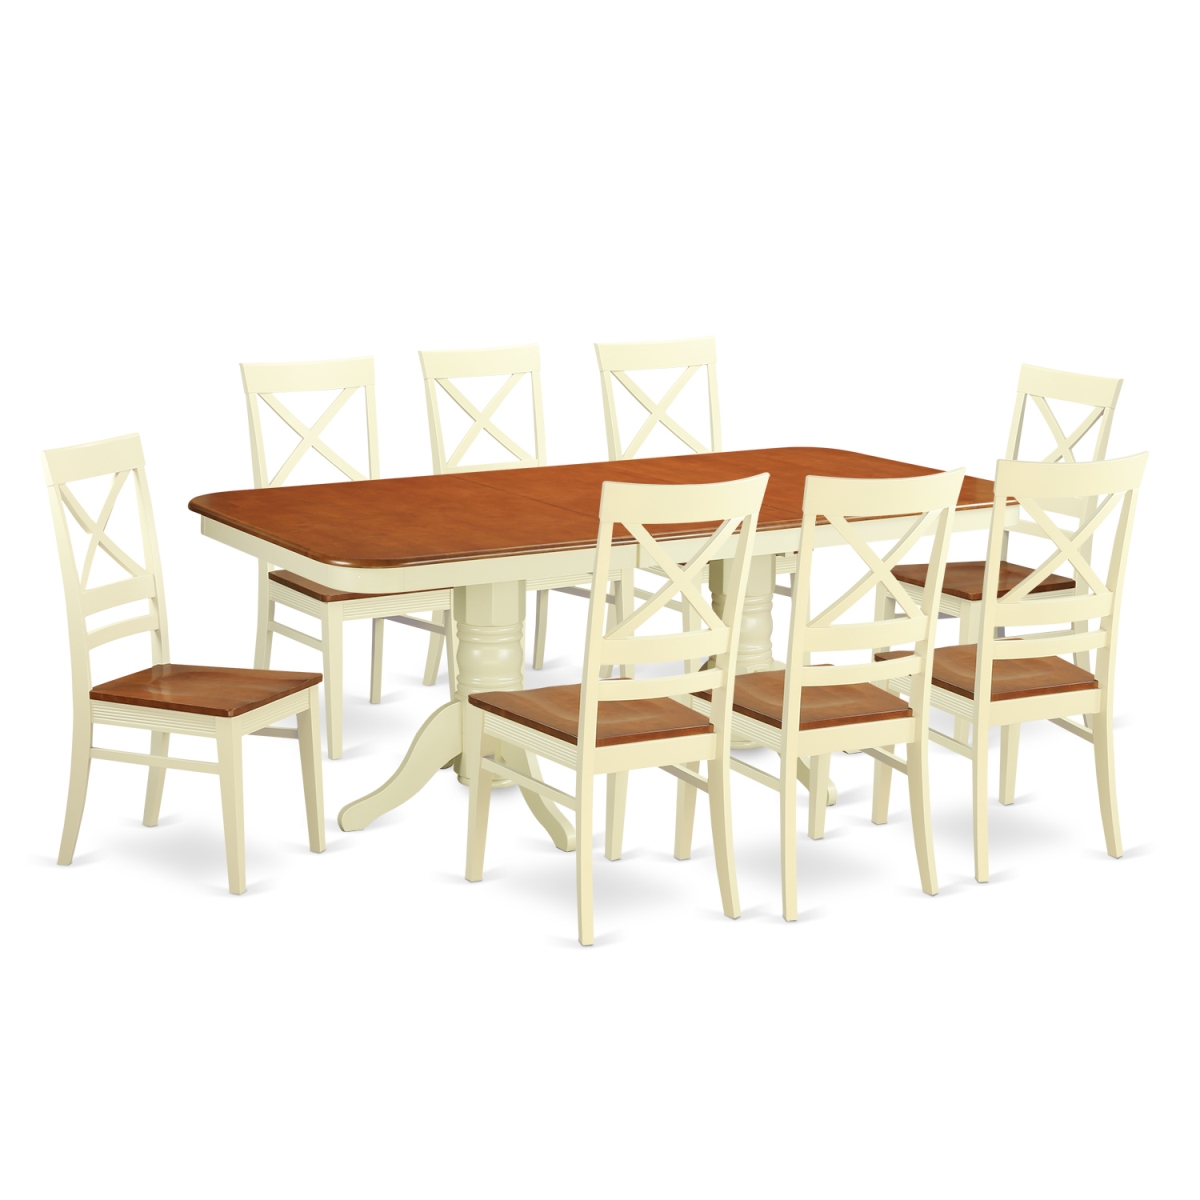 NAQU9-WHI-W Dining Table Set with 8 Table & 8 Chairs, Buttermilk & Cherry - 9 Piece -  East West Furniture